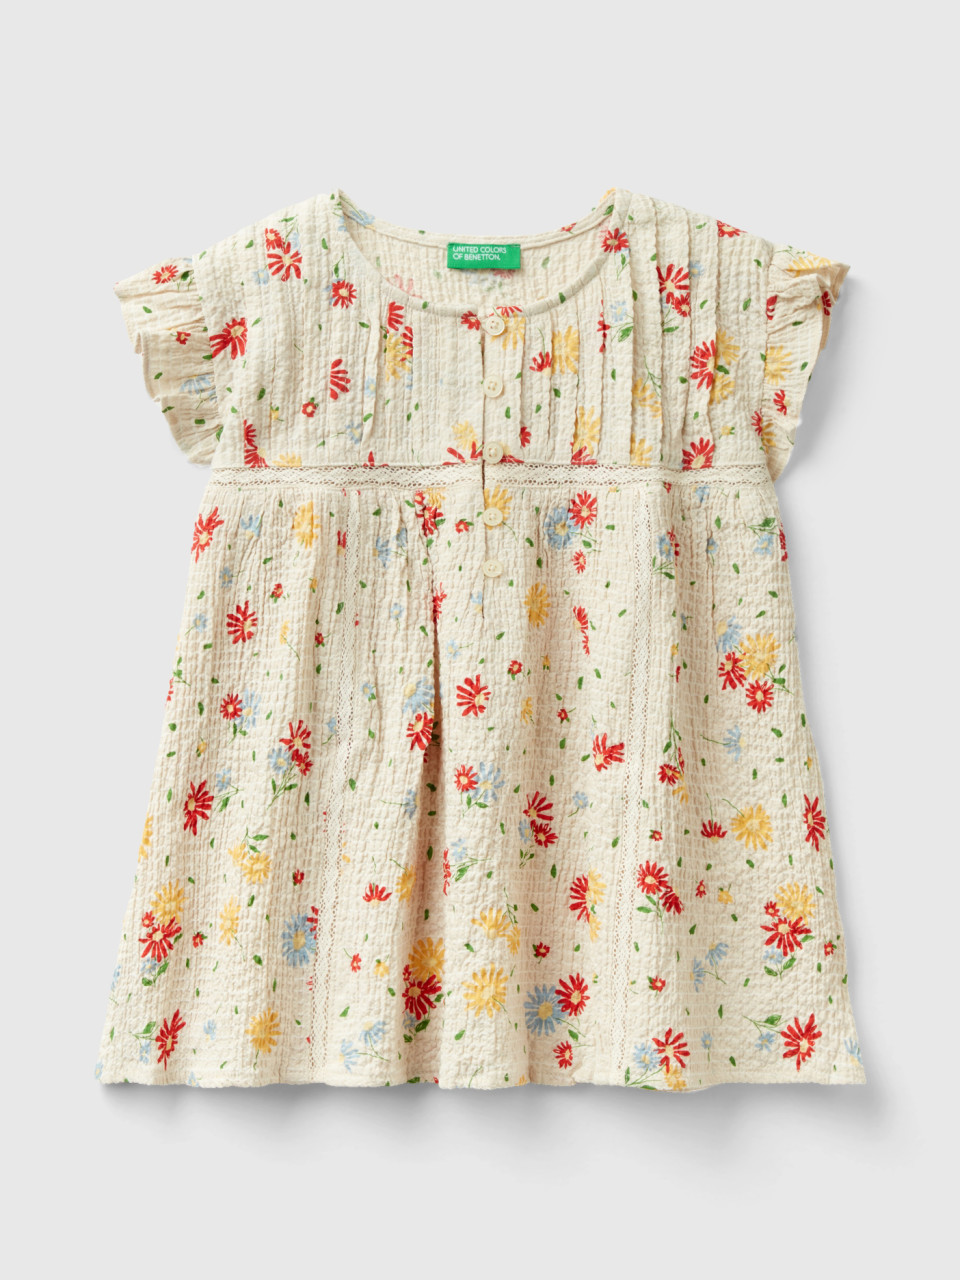 Benetton, Floral Blouse With Rouches, Creamy White, Kids